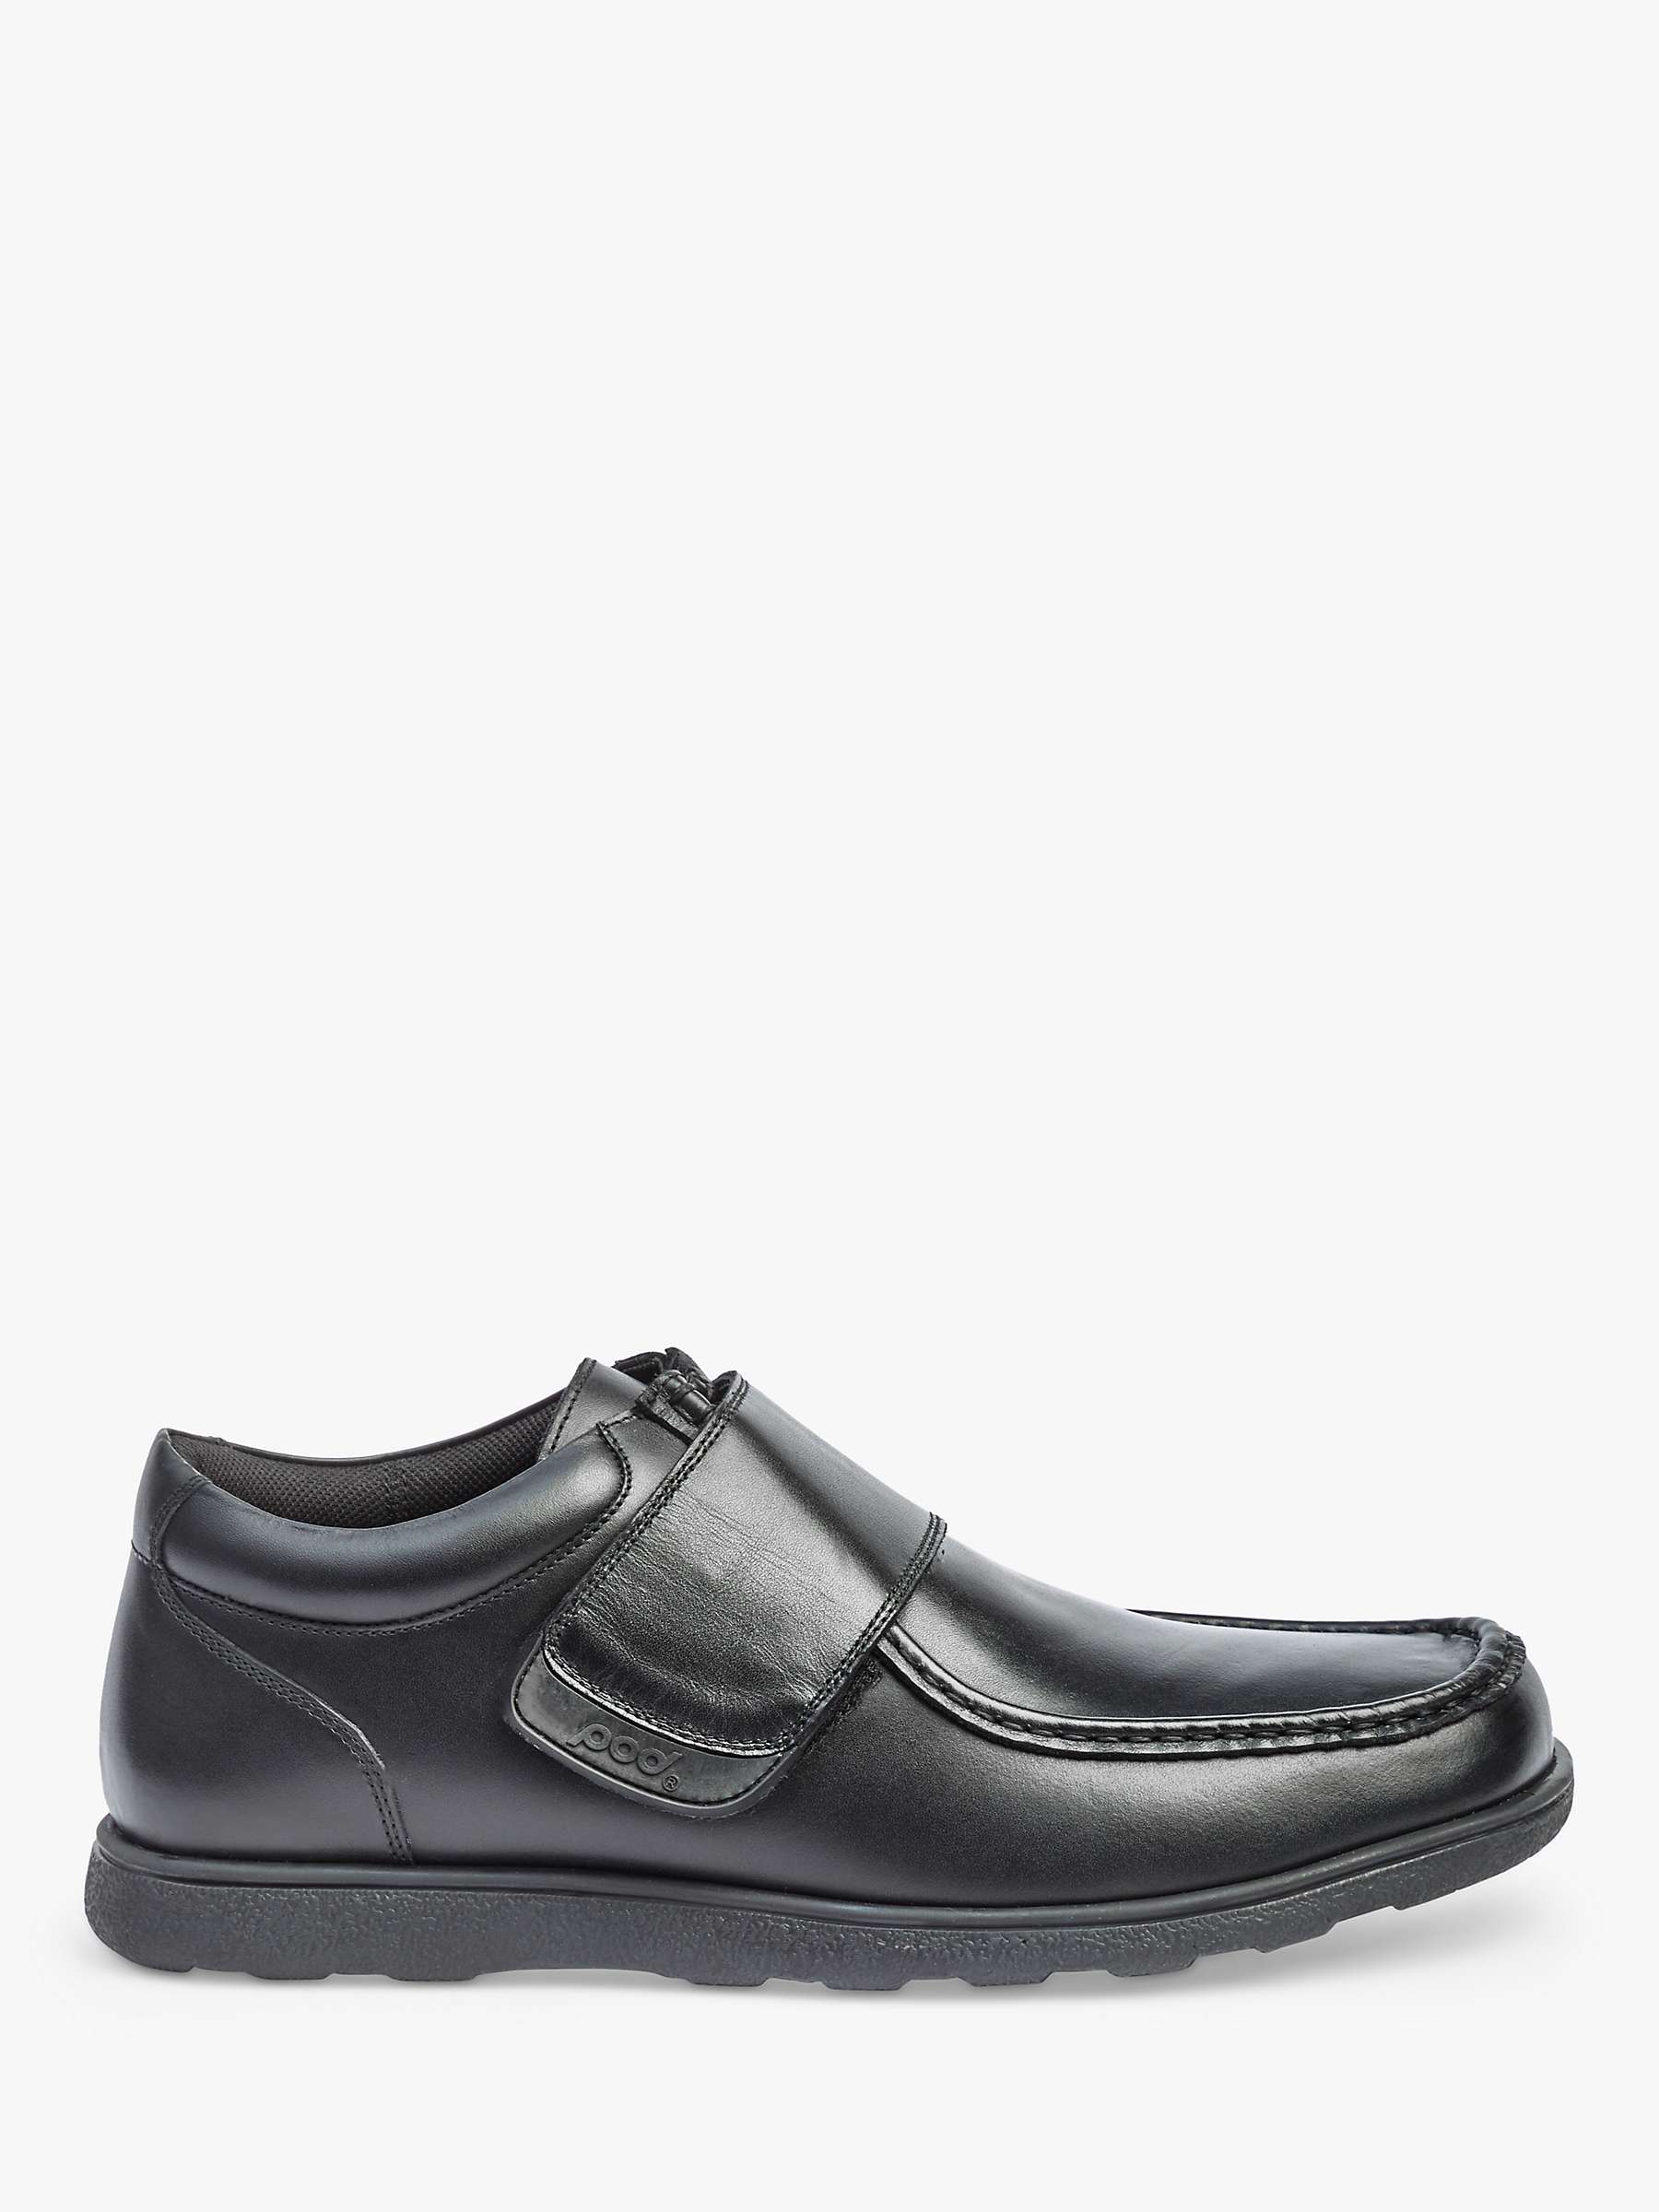 Buy Pod Malcome Leather Moccasin Shoes, Black Online at johnlewis.com